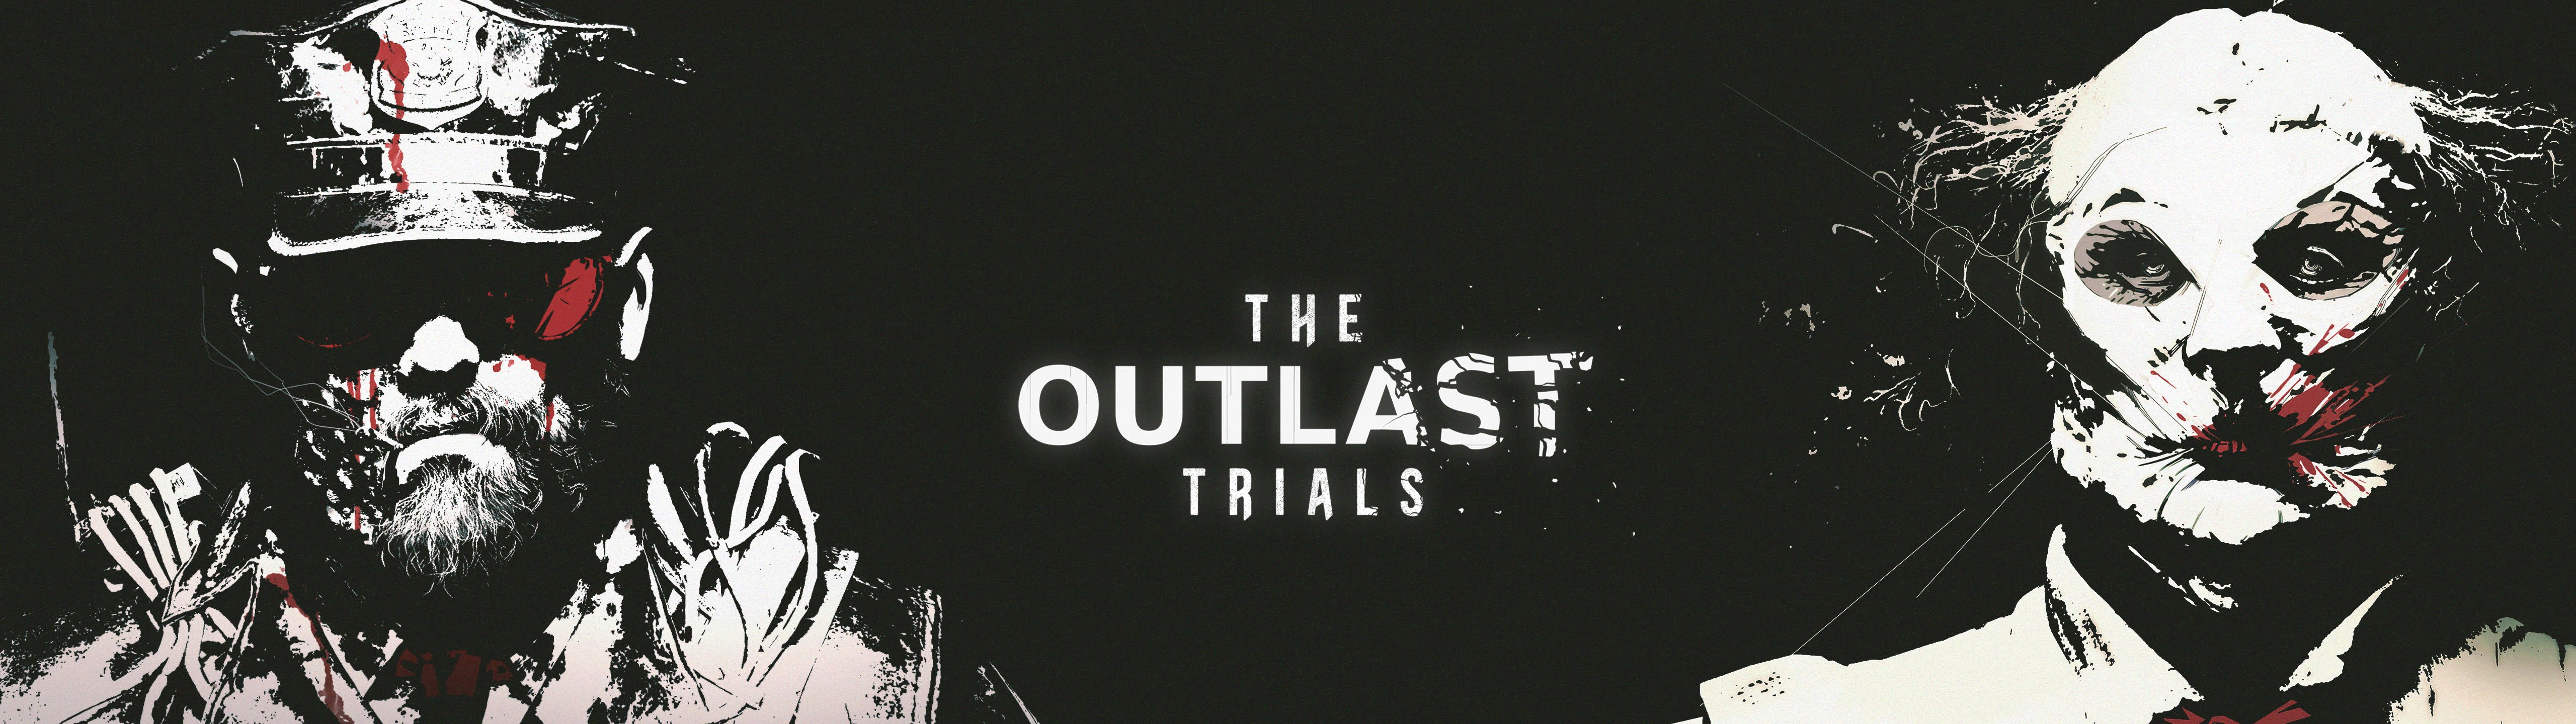 The Outlast Trials - Wallpapers - Red Barrels